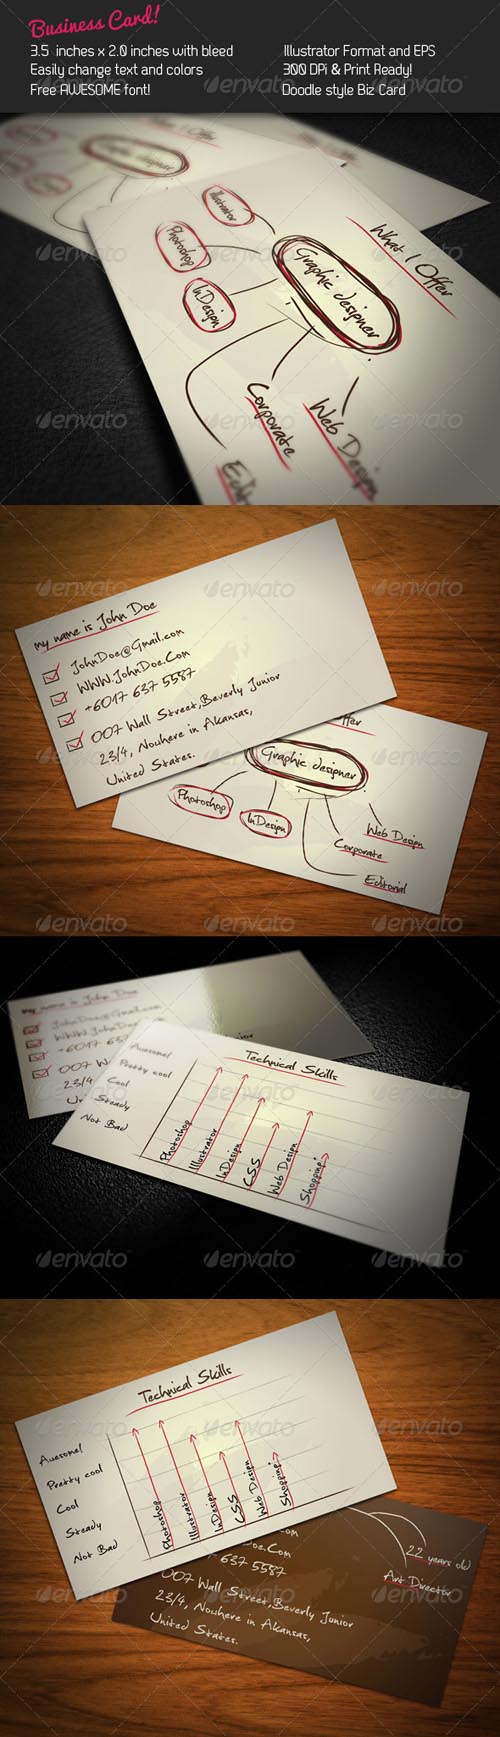 Doodle Business Card - GraphicRiver